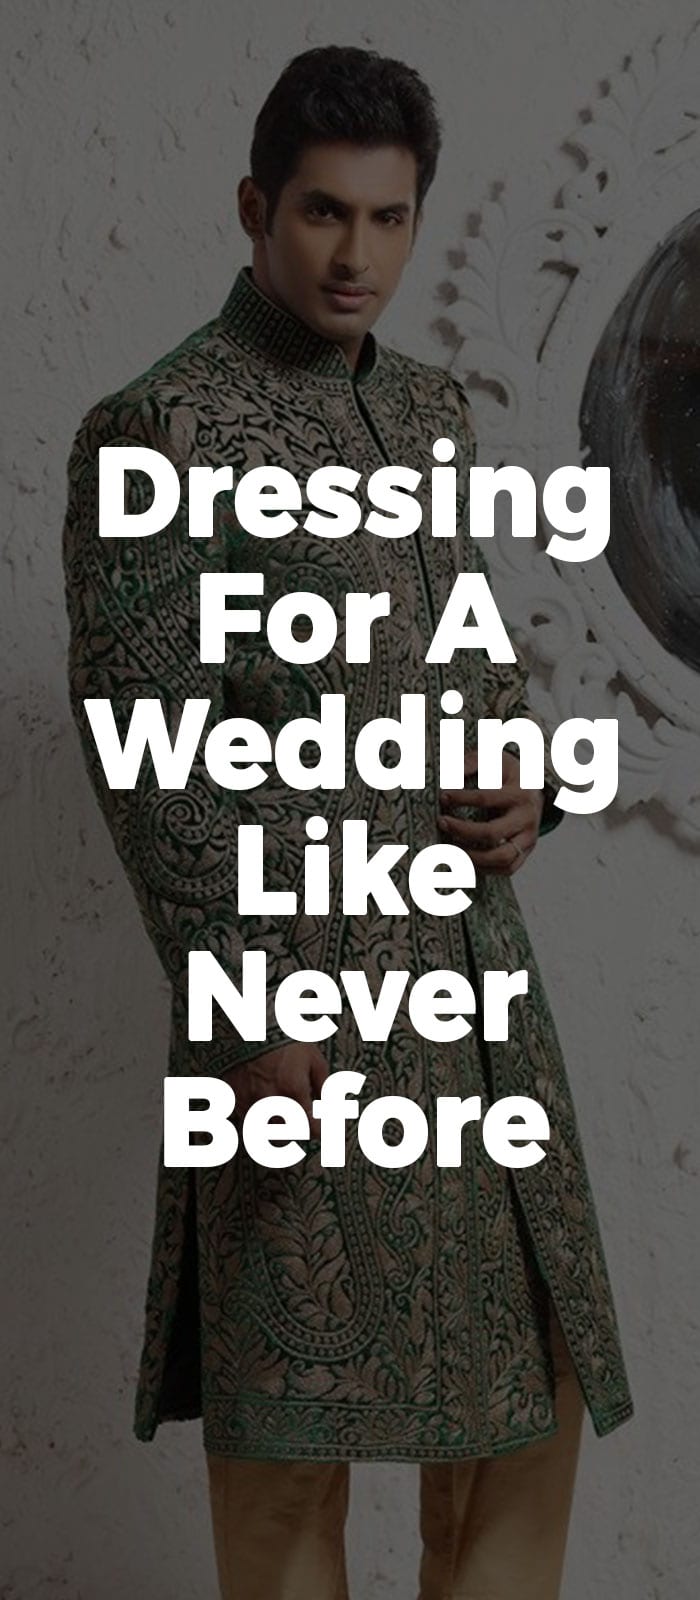 Dressing for a Wedding Like Never Before